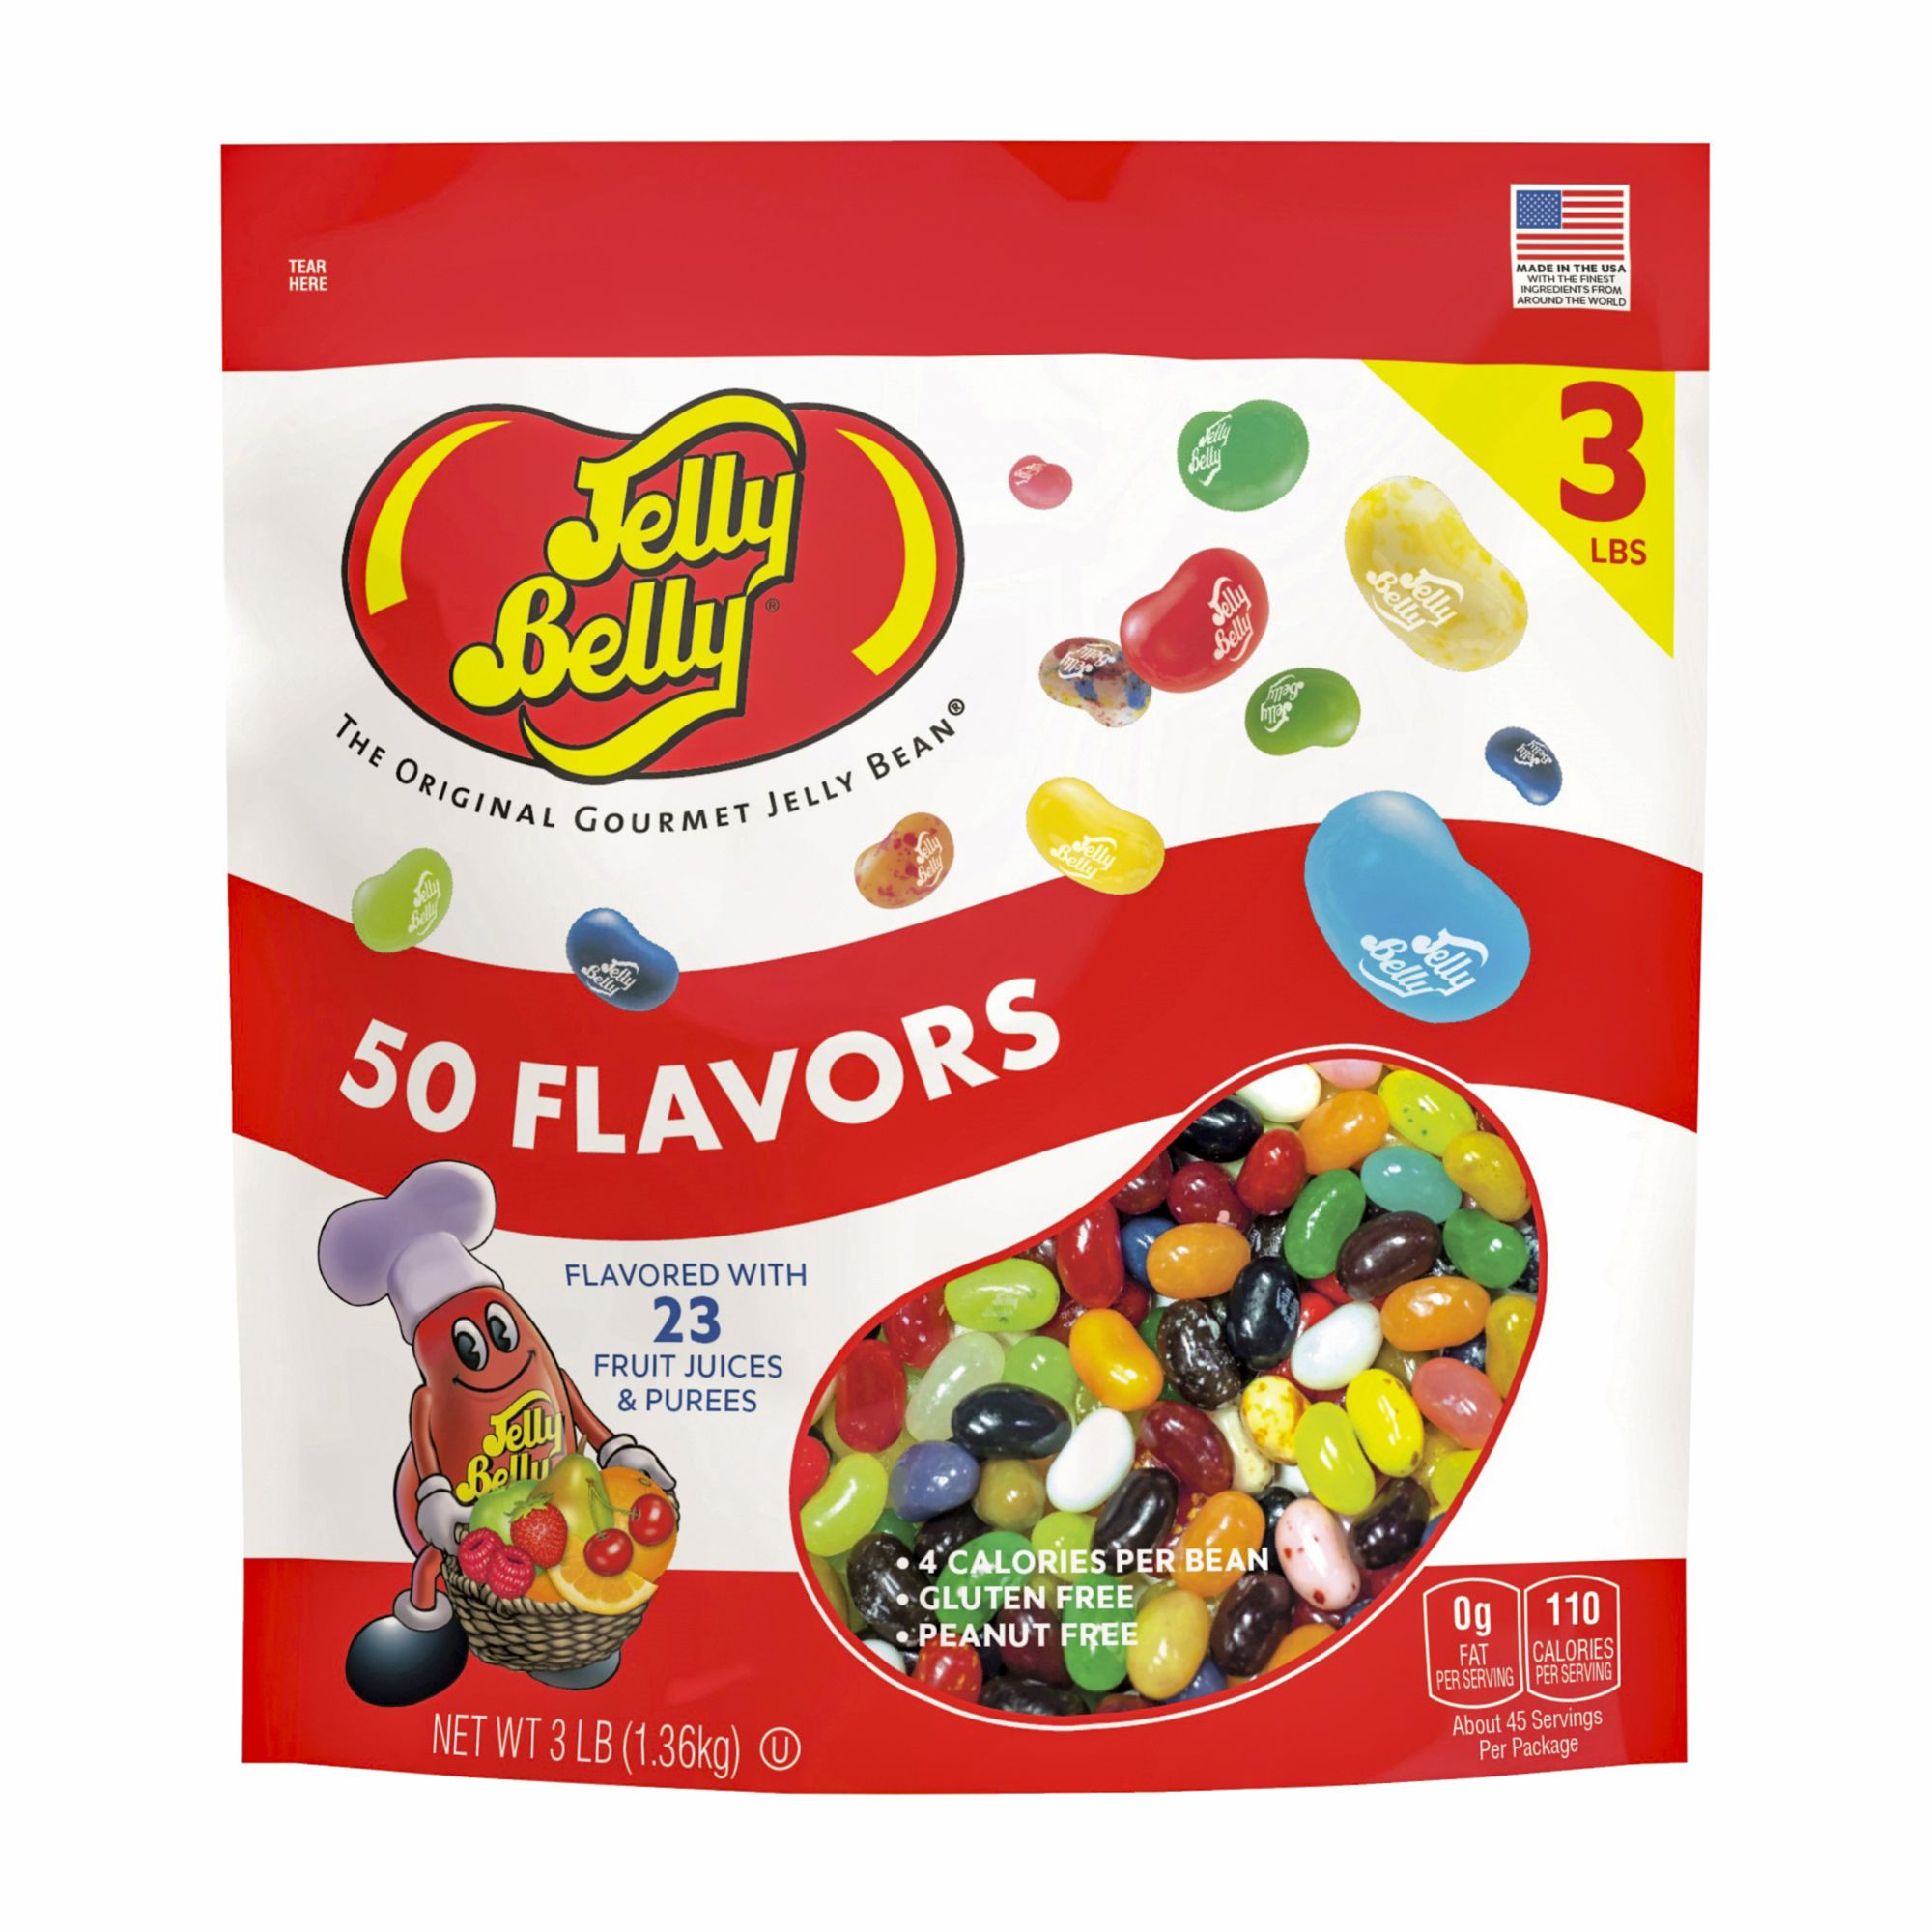 BRACHS, Candy Jelly Bean CLSSC PC, 5 LB, (Pack of 1)